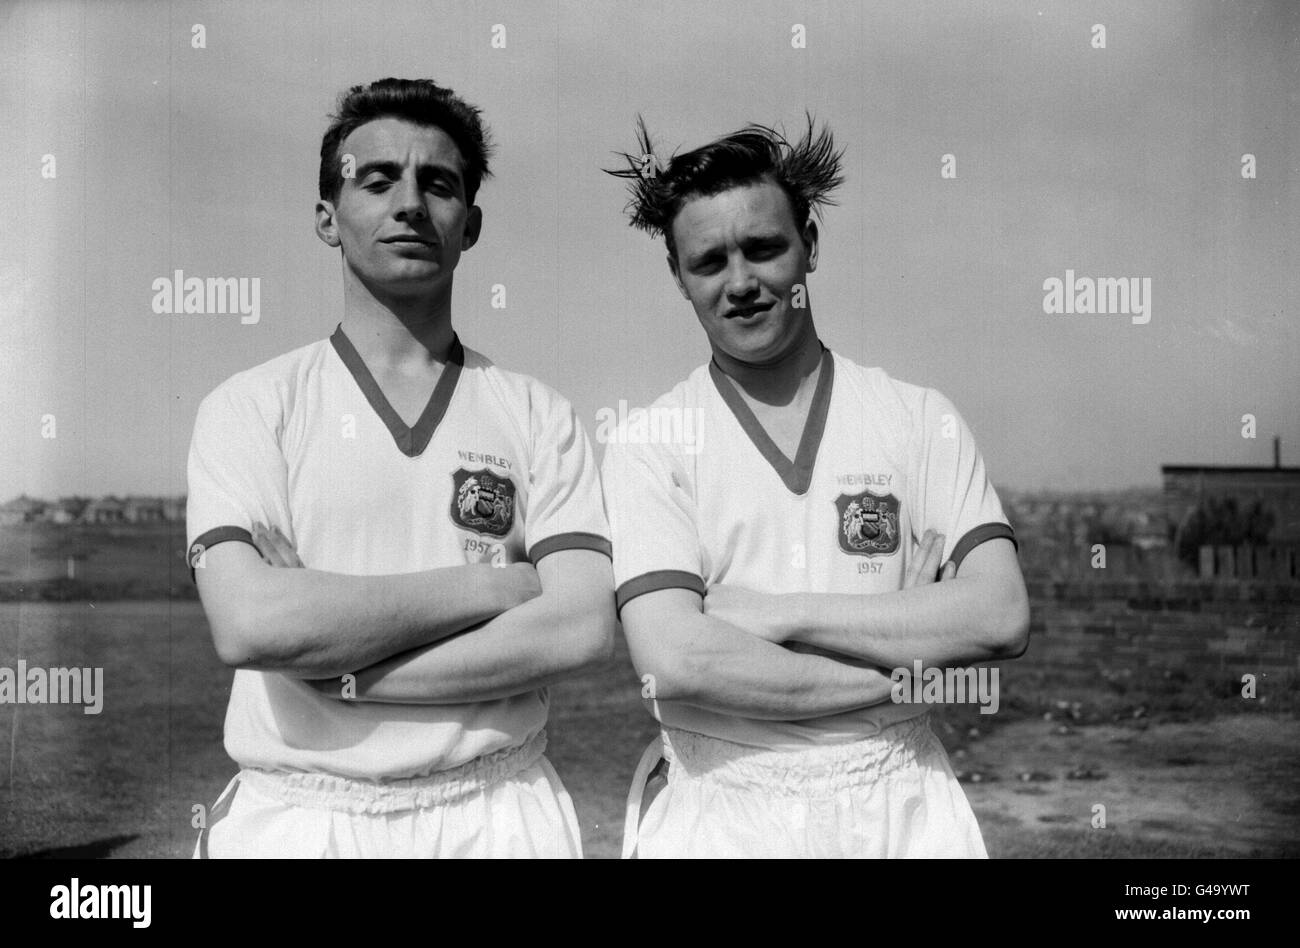 PA NEWS PHOTO 6/2/58 HALF-BACK EDDIE COLMAN (RIGHT) ONE OF THE PLAYERS OF THE MUNICH AIRCRASH WHERE MANCHESTER UNITED FOOTBALL TEAM WERE ON A EUROPEAN CUP VISIT TO BELGRADE. THE BEA ELIZABETH AIRLINER WHICH CRASHED DOWN. OF THE FORTY PEOPLE ABOARD IT IS BELIEVED THERE WERE TWELVE SURVIVORS, FOUR CREW MEMBERS AND EIGHT PASSENGERS. Stock Photo